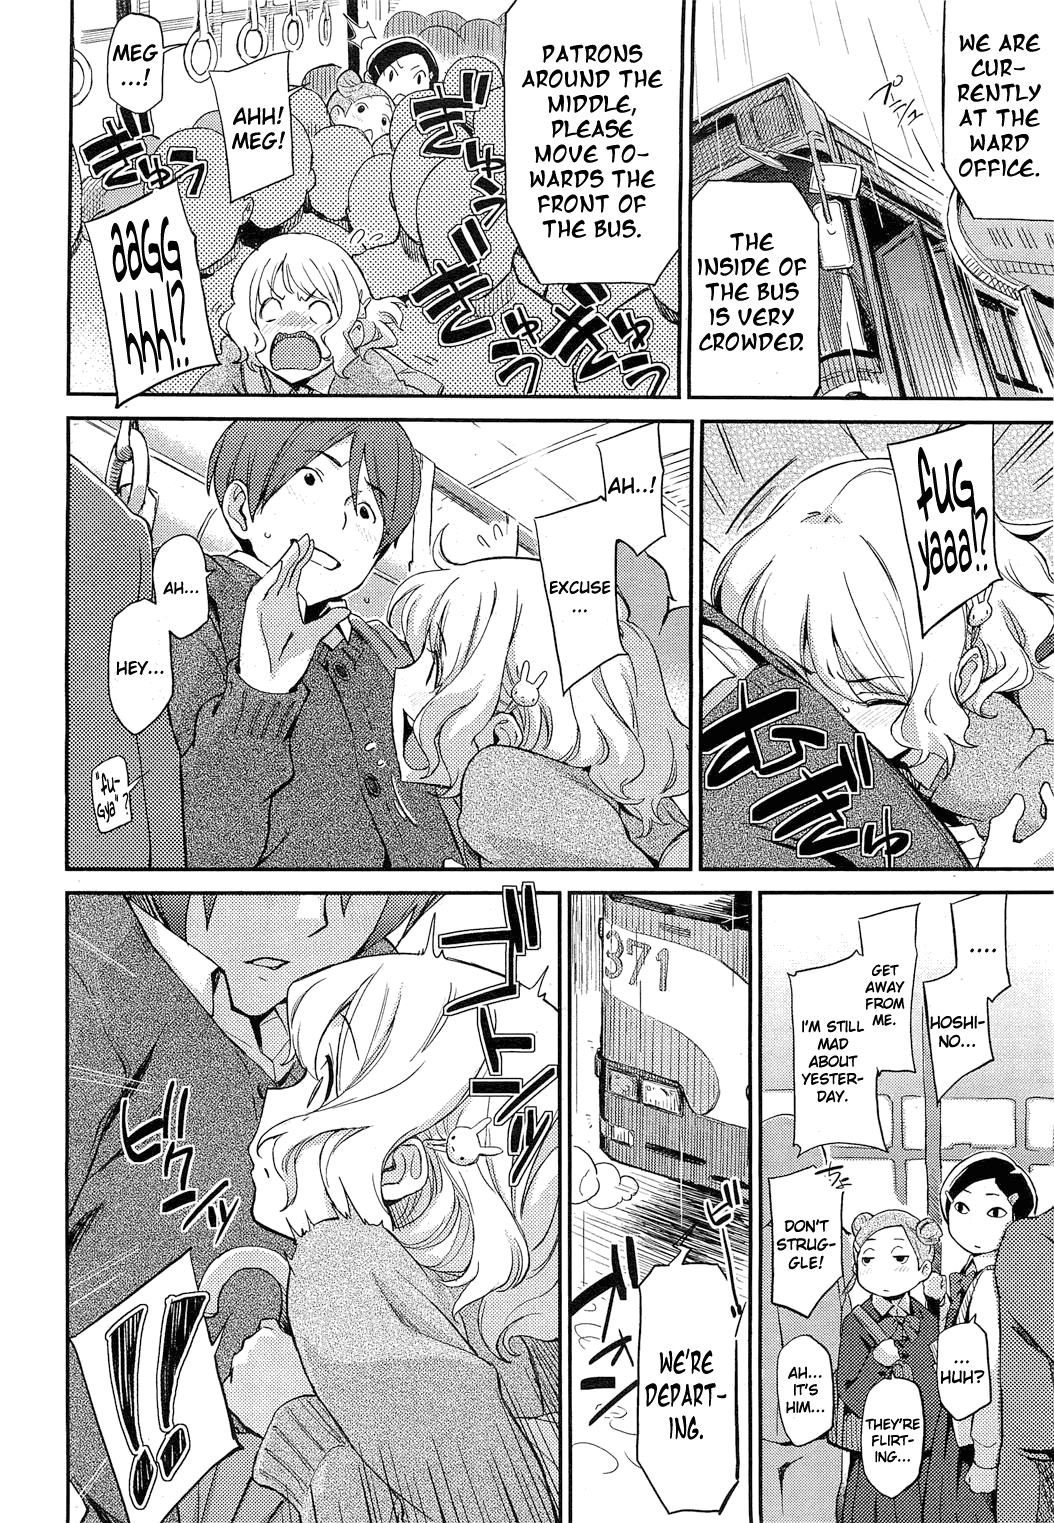 [Minato Fumi] Don't touch me! (COMIC HOTMiLK 2012-03) [English] [life4Kaoru] [三巷文] Don't touch me! (コミックホットミルク 2012年3月号) [英訳]